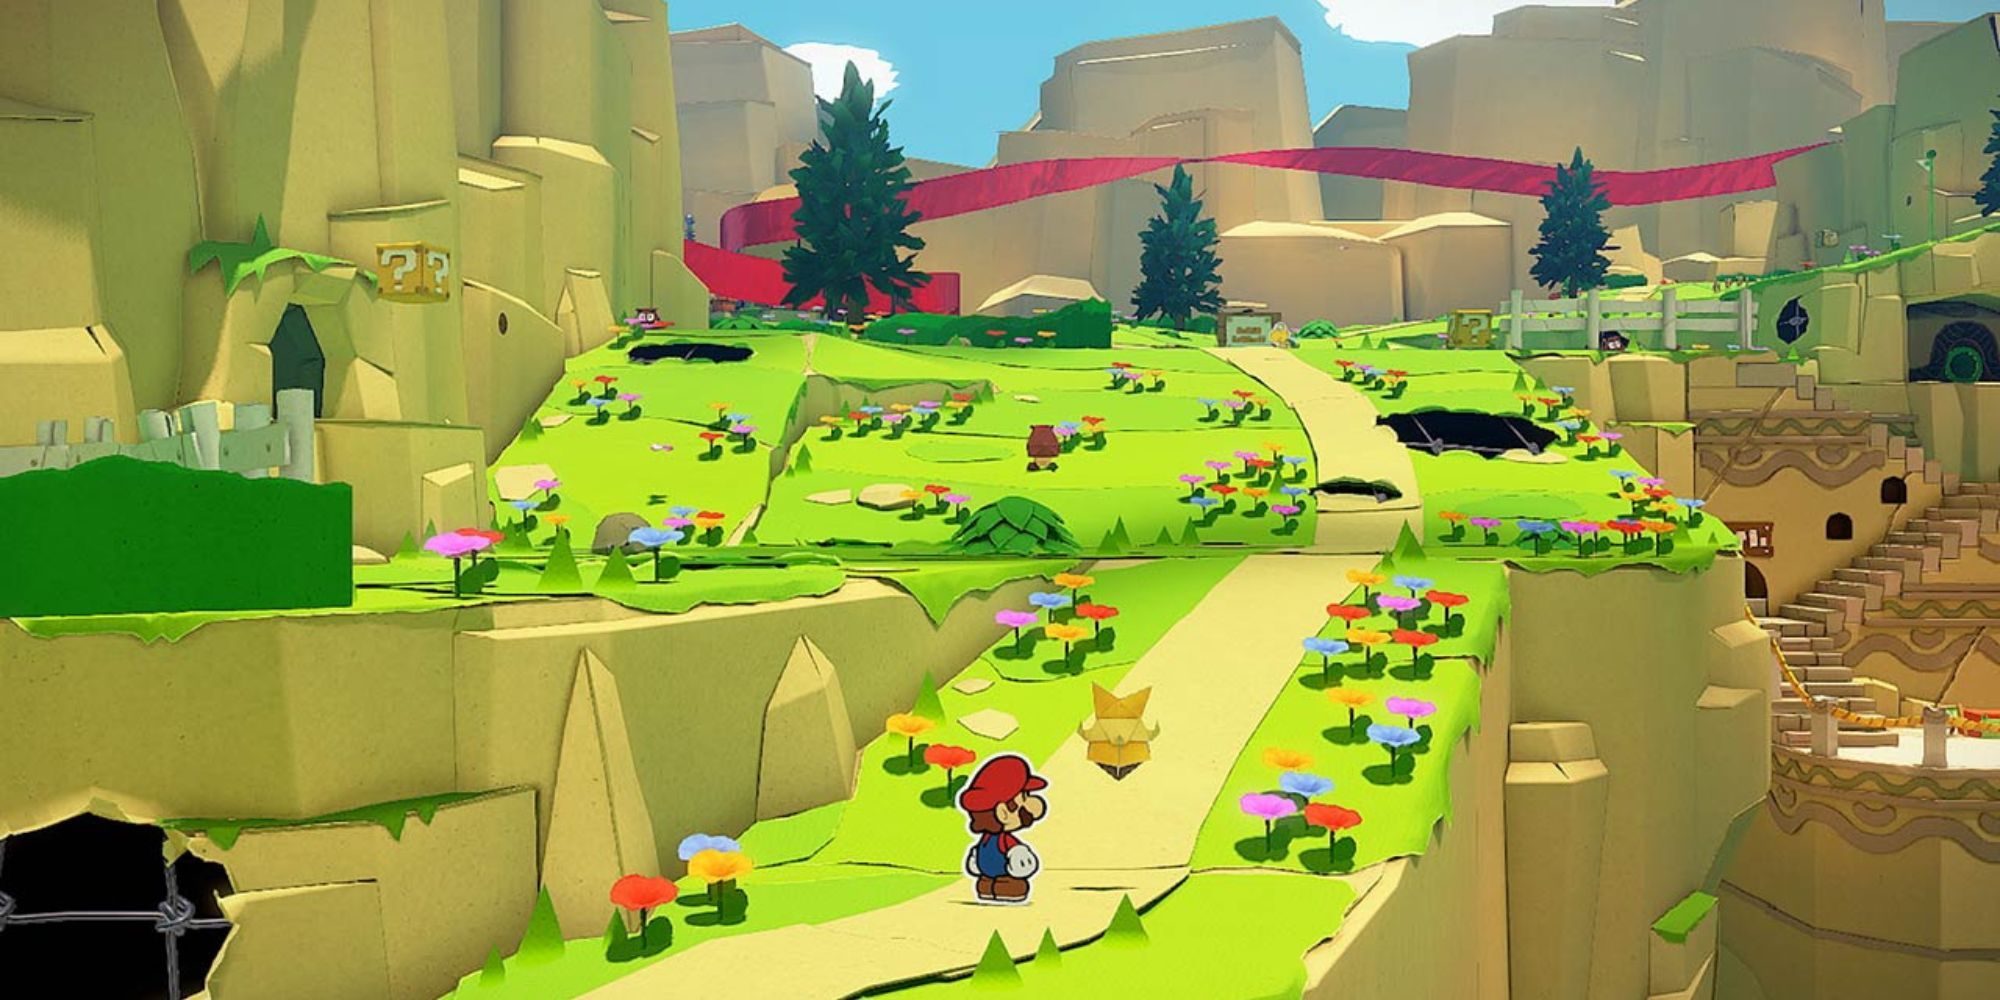 Mario walking up a hill in Paper Mario: The Origami King